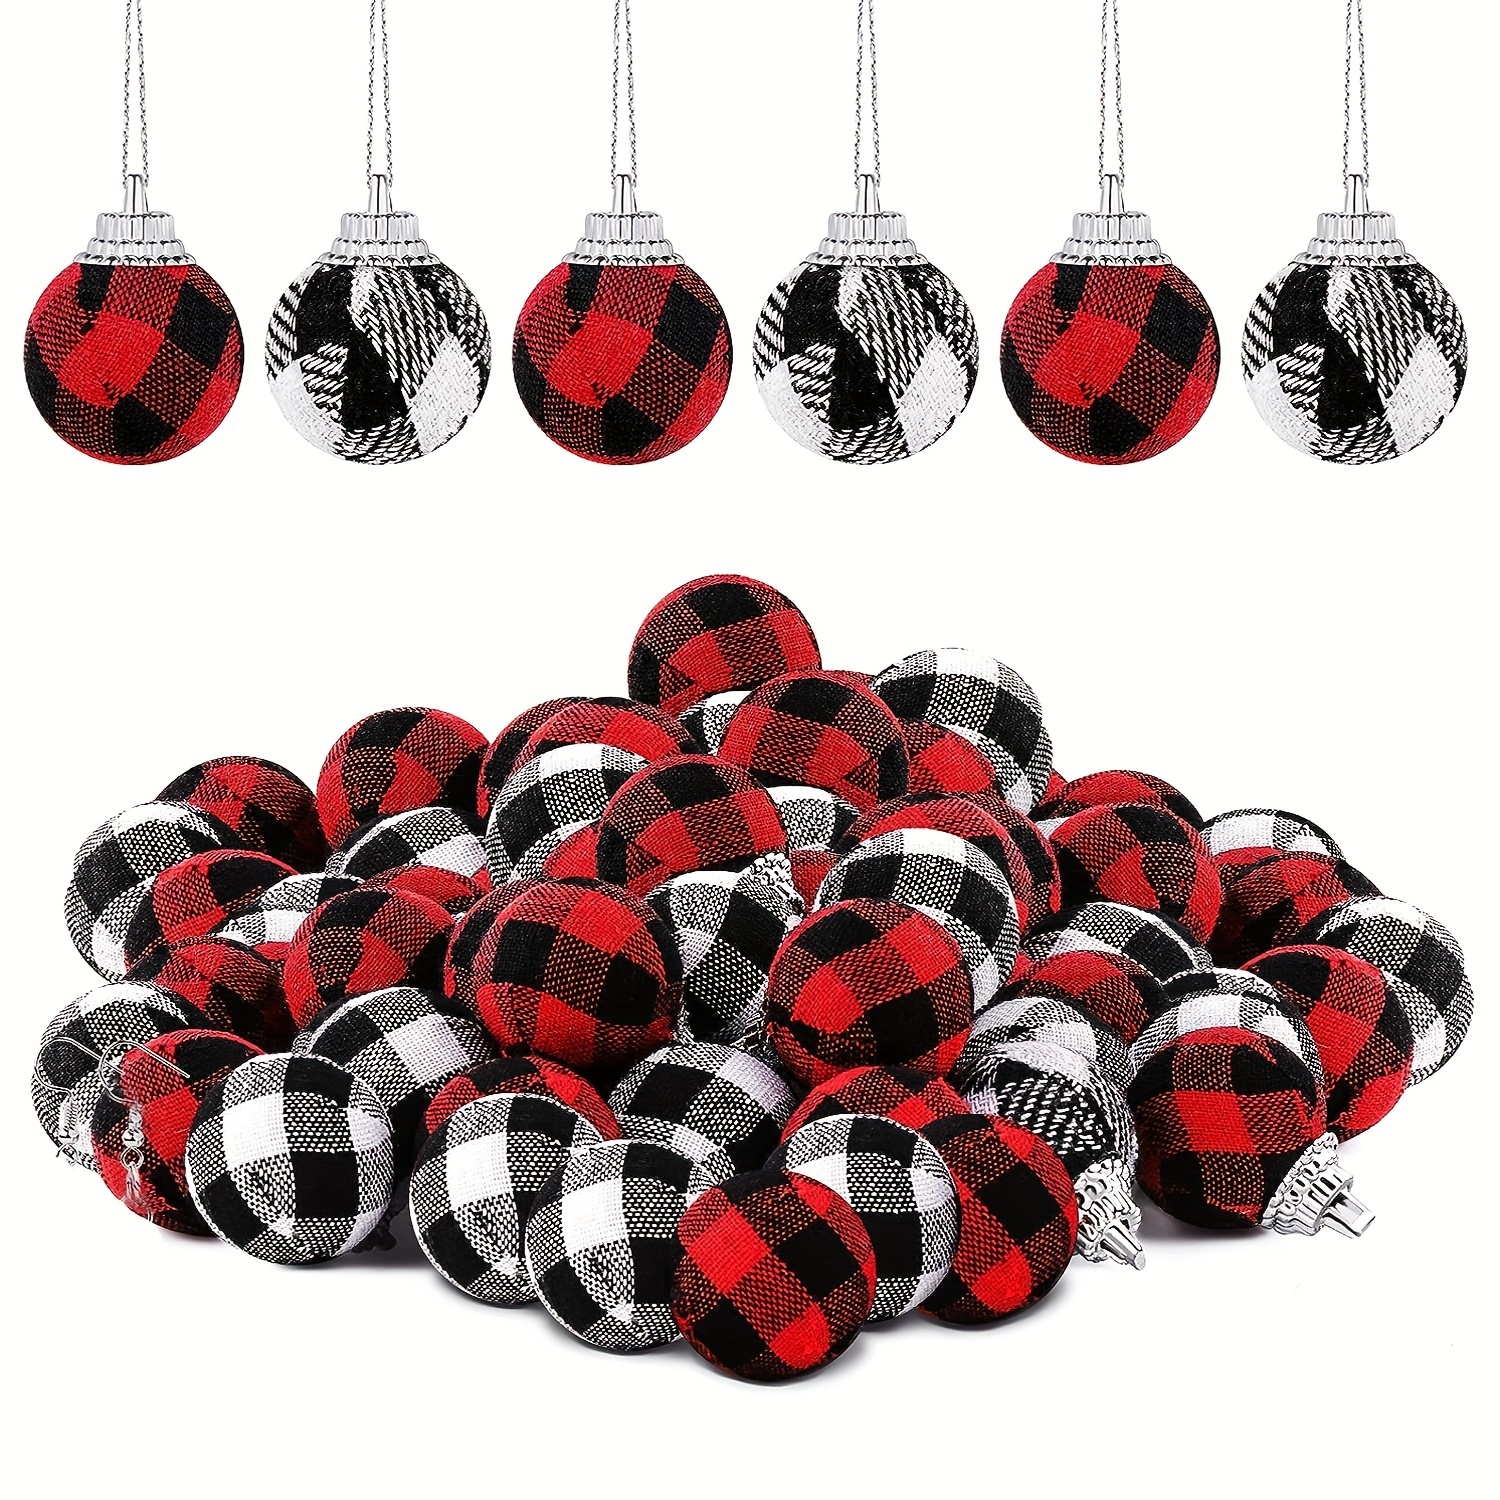 6pcs Christmas Plaid Ball Ornaments - 3 Inch Black & Red Buffalo Plaid  Fabric Ball Ornaments With Pine Cones And Greenery